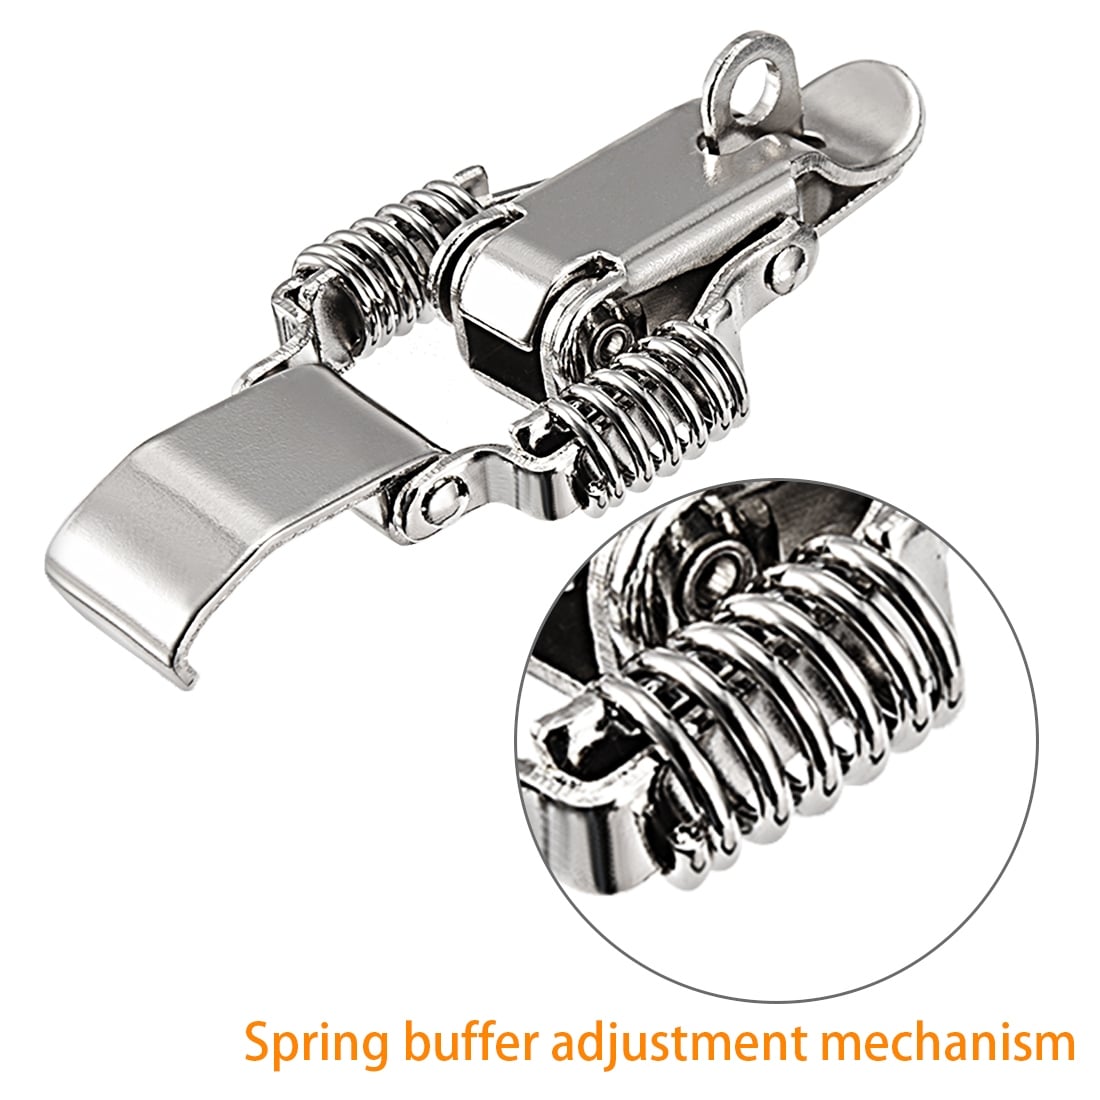 201 Stainless Steel Spring Loaded Toggle Latch Catch Clamp Hasps